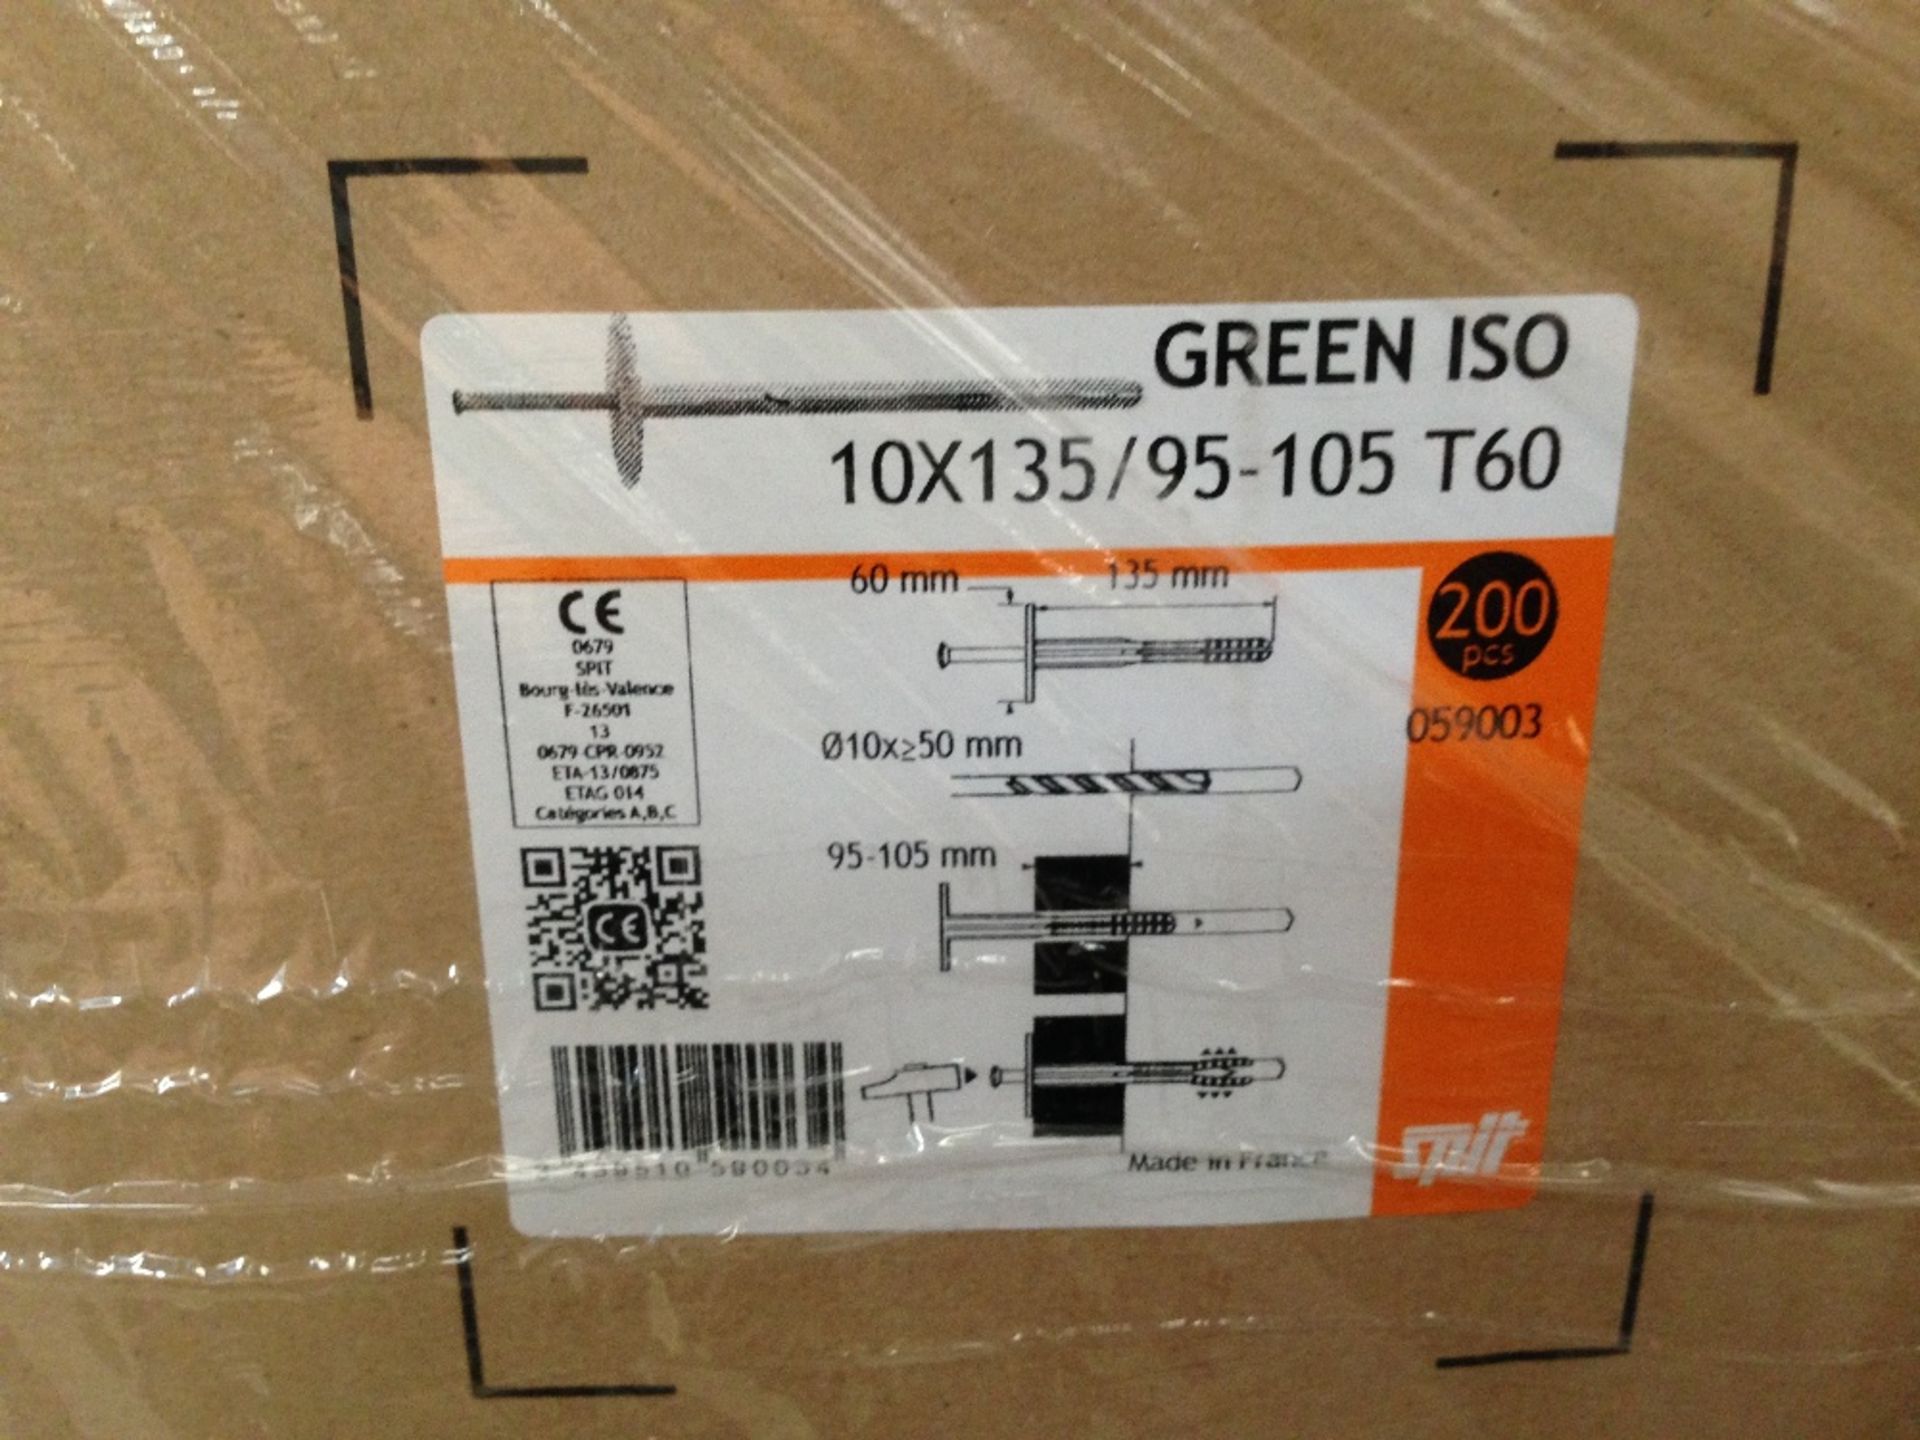 Pallet of SPIT Green Iso 10x135/95-105 T60 nailed in plastic anchors 55 boxes x 200 pieces - Image 2 of 2